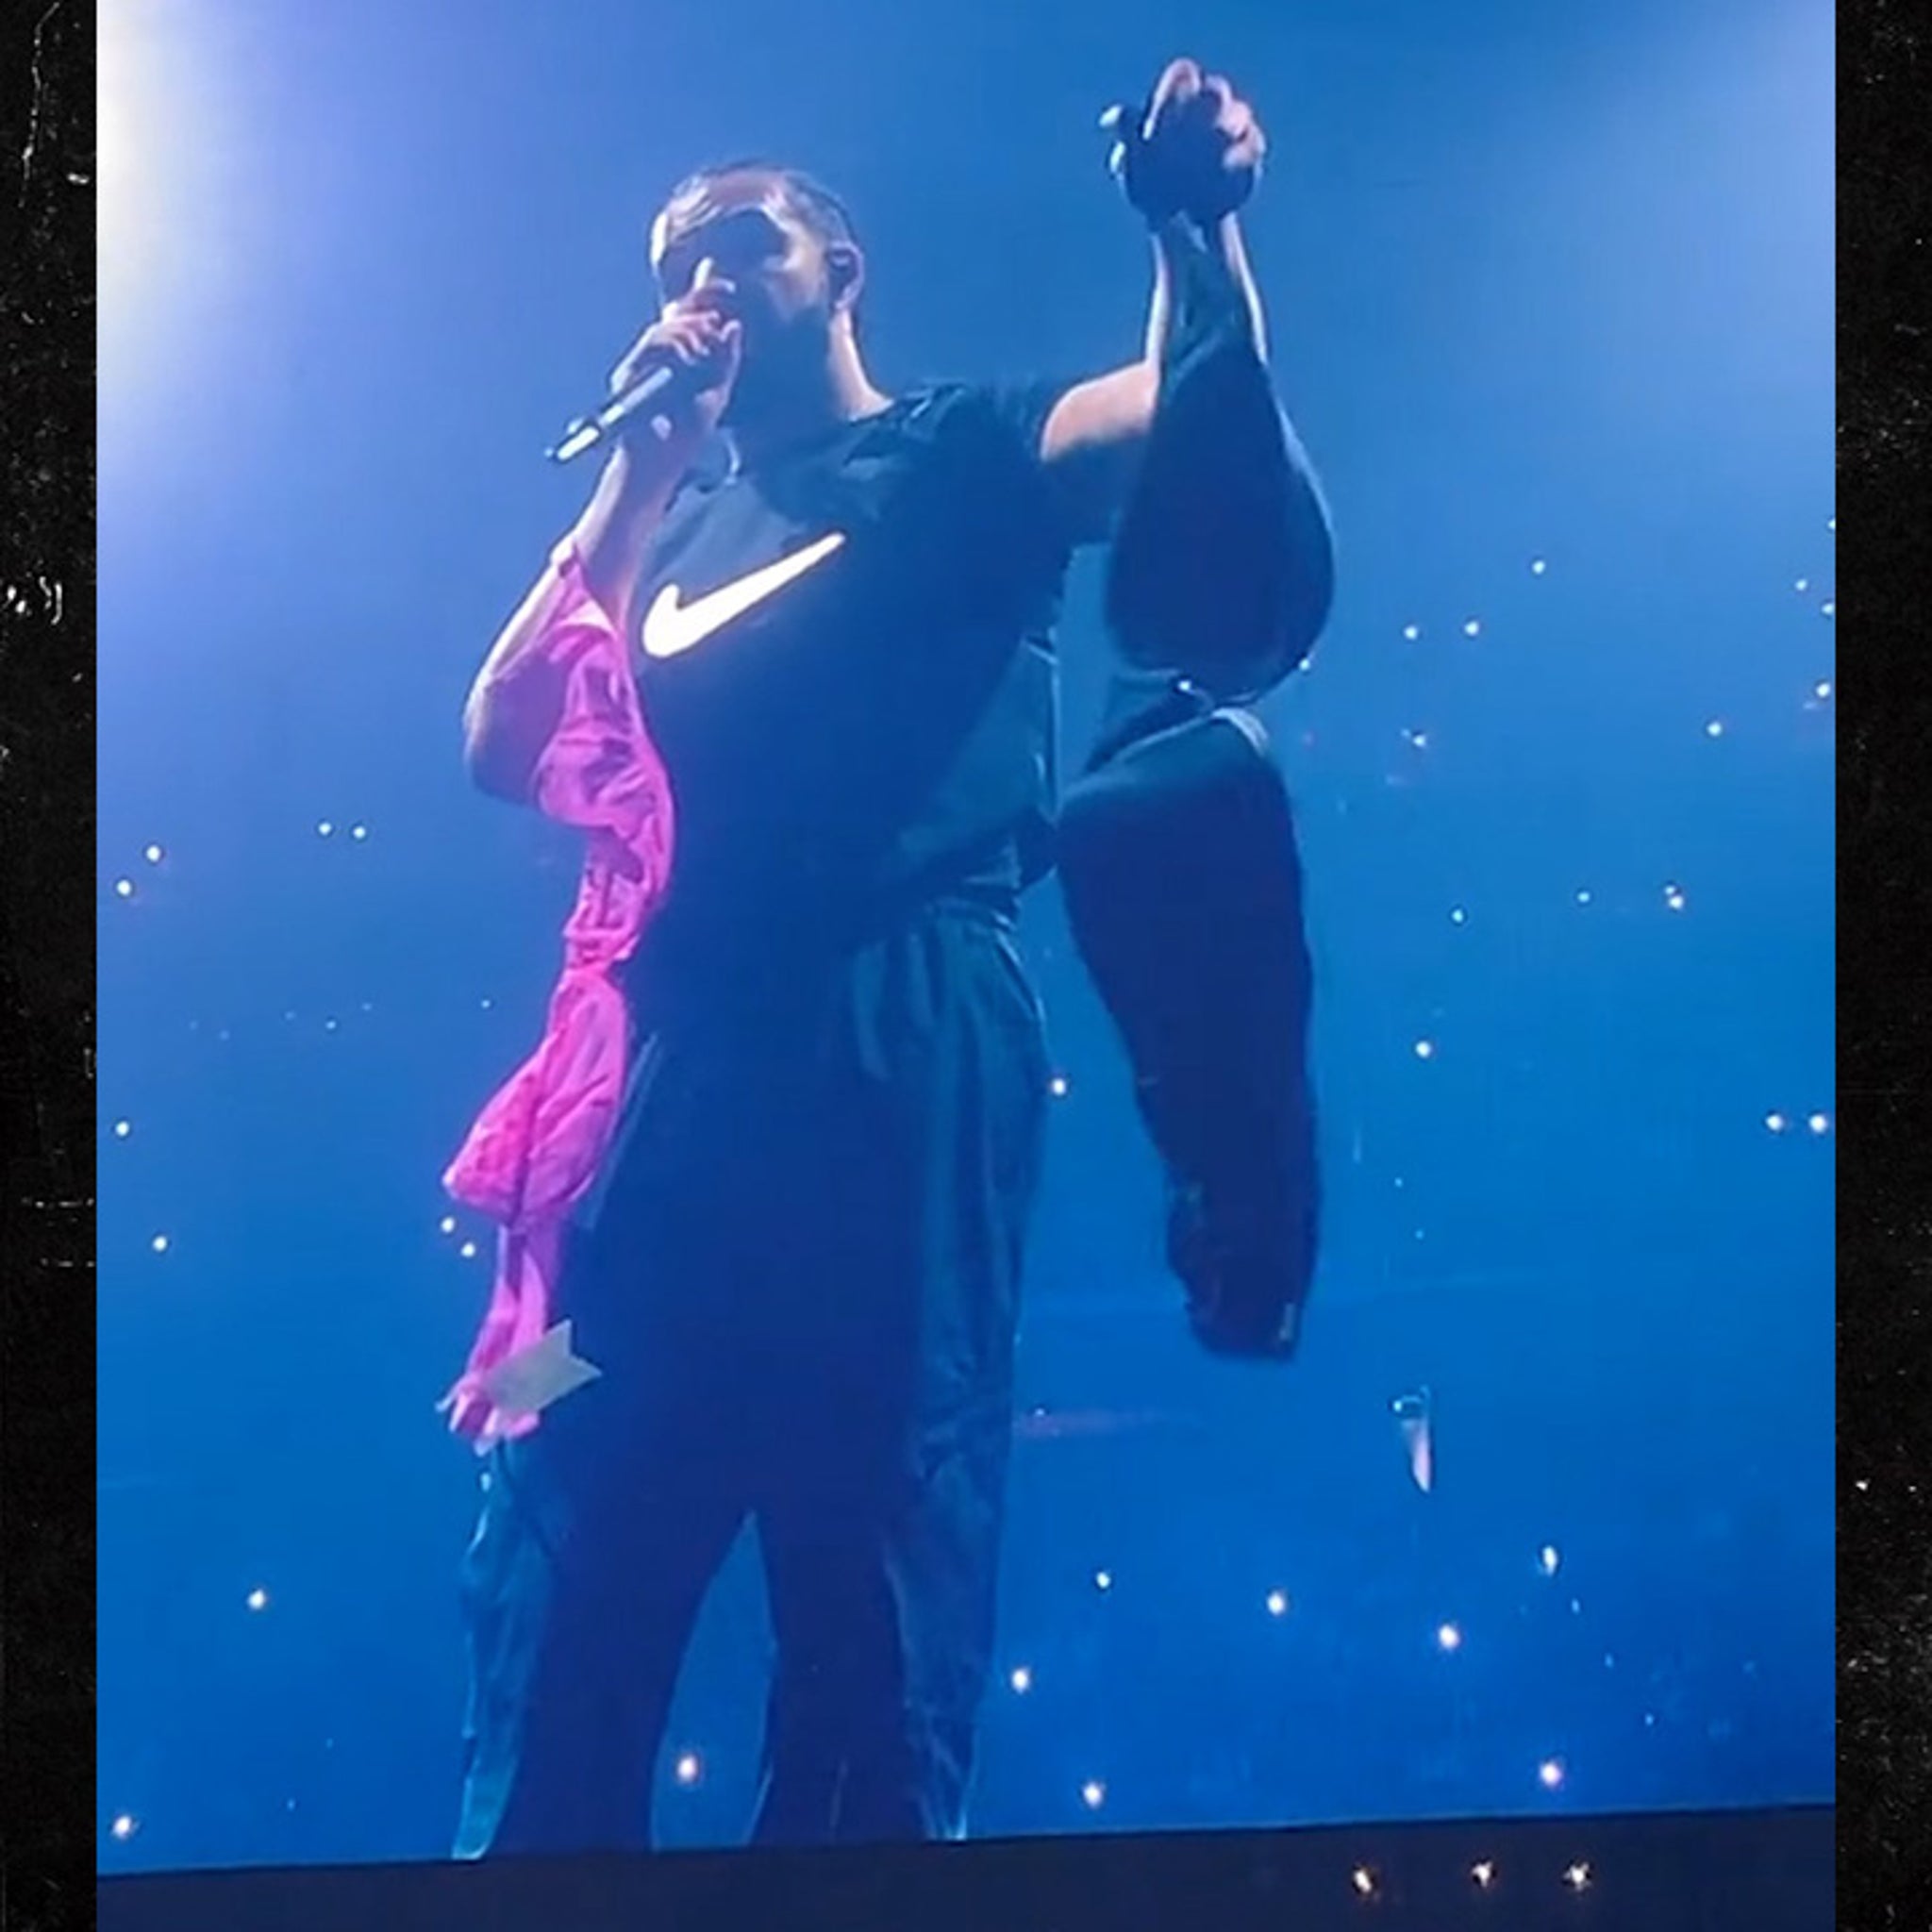 Battle Of The Bra: Drake Reacts To An L-Cup Thrown On Stage